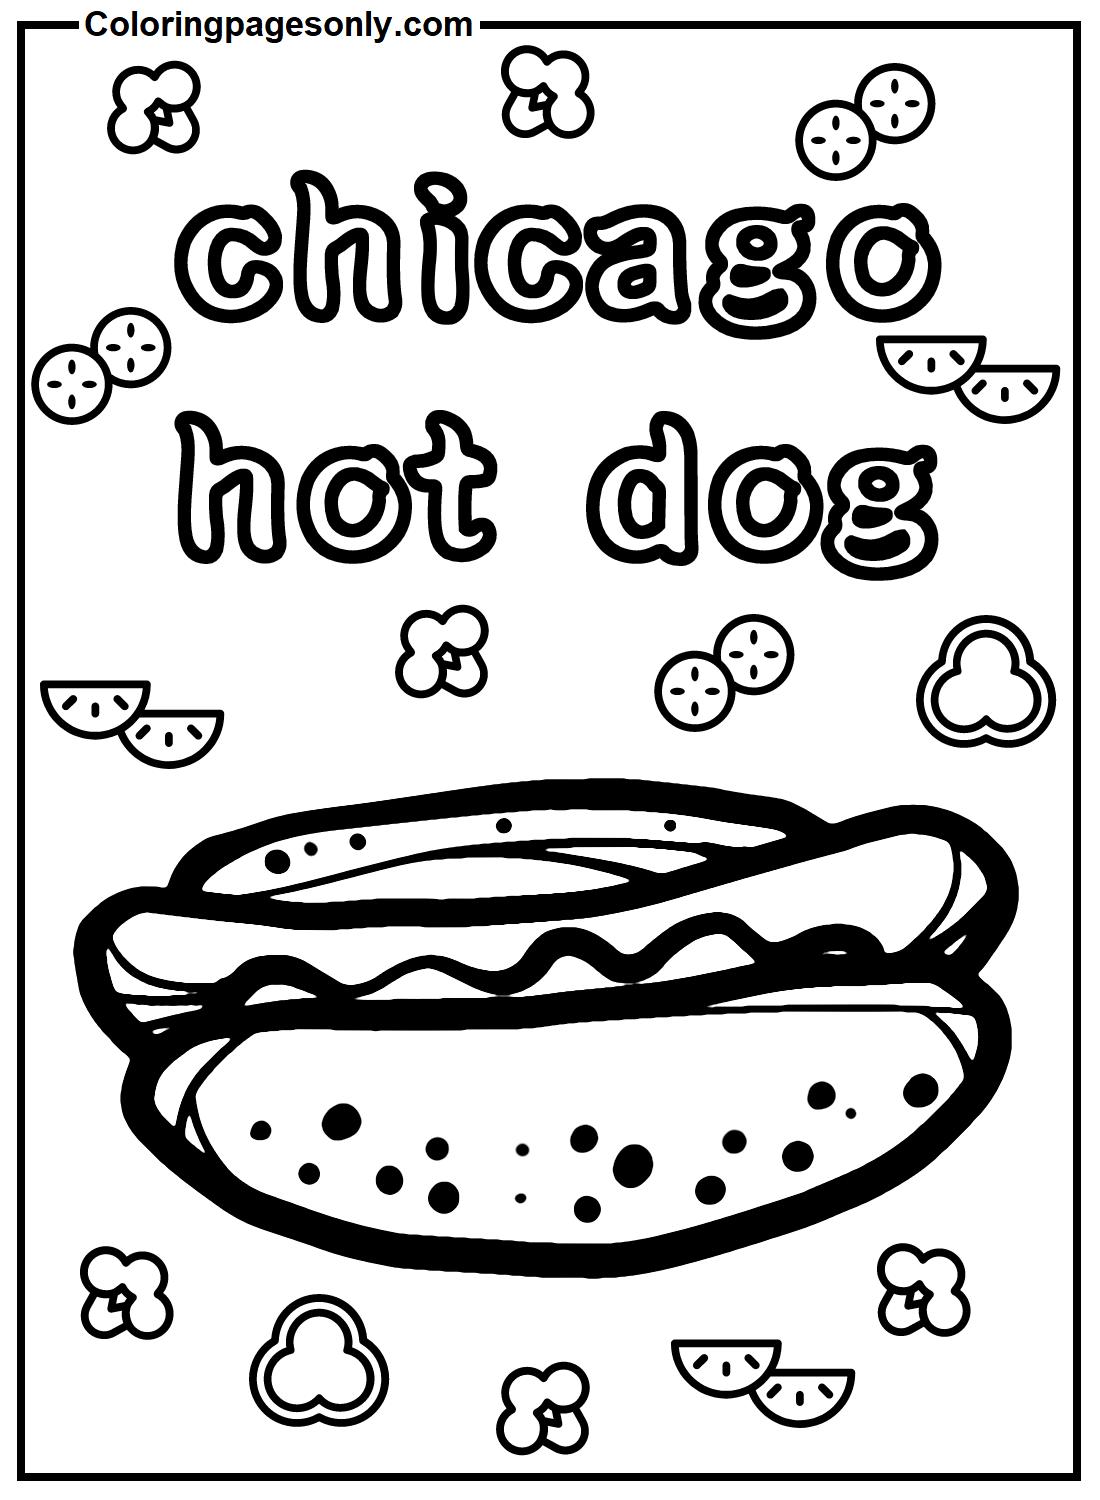 Chicago Hot Dog Coloring Pages